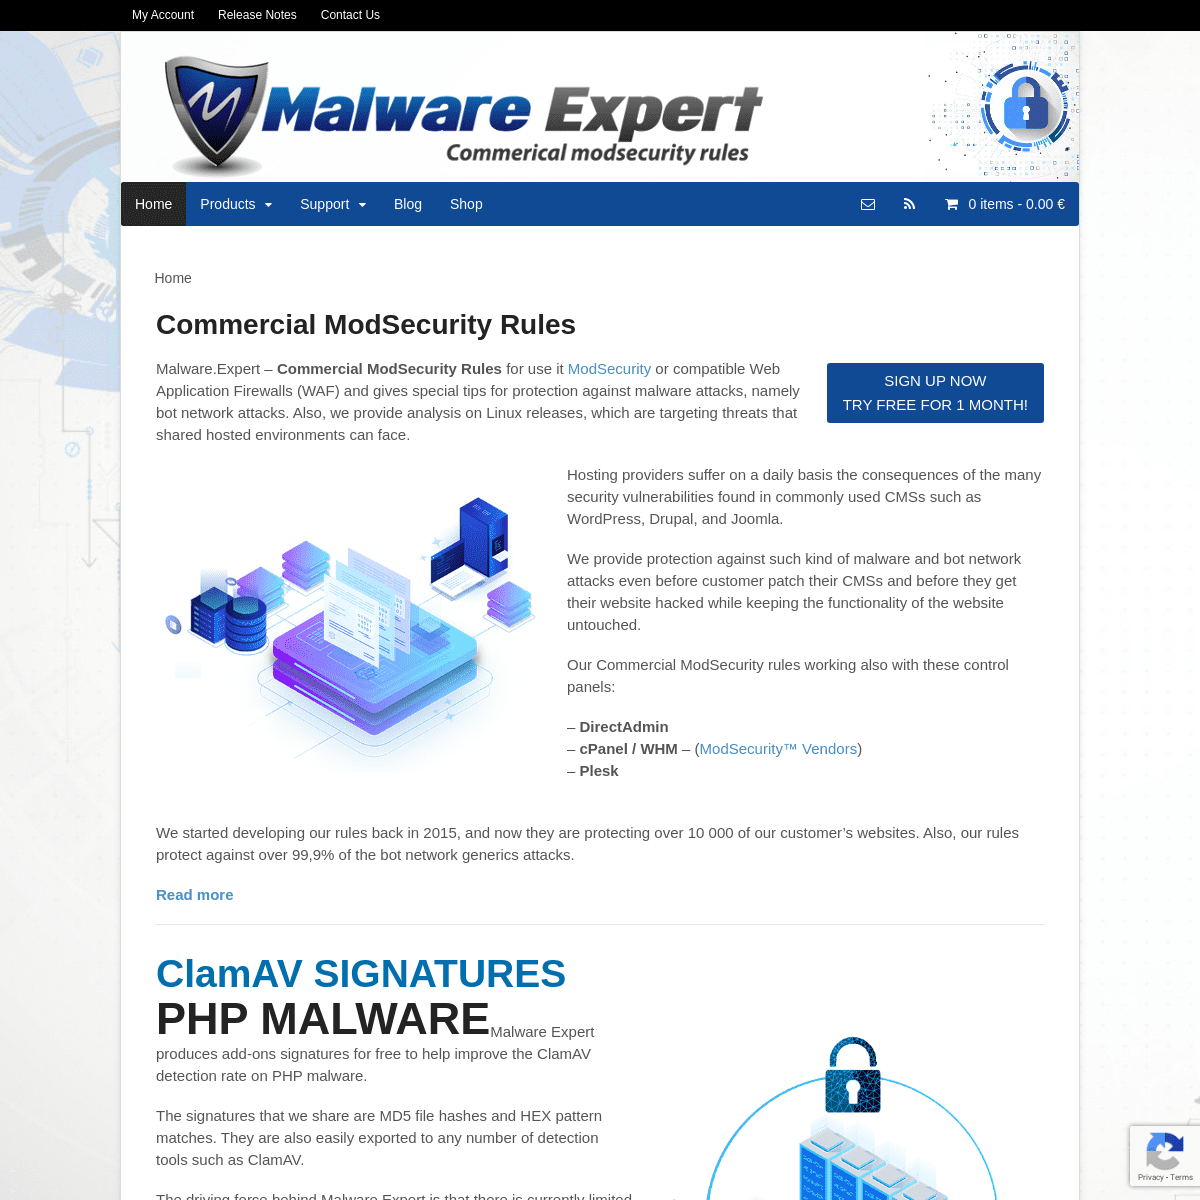 A complete backup of malware.expert